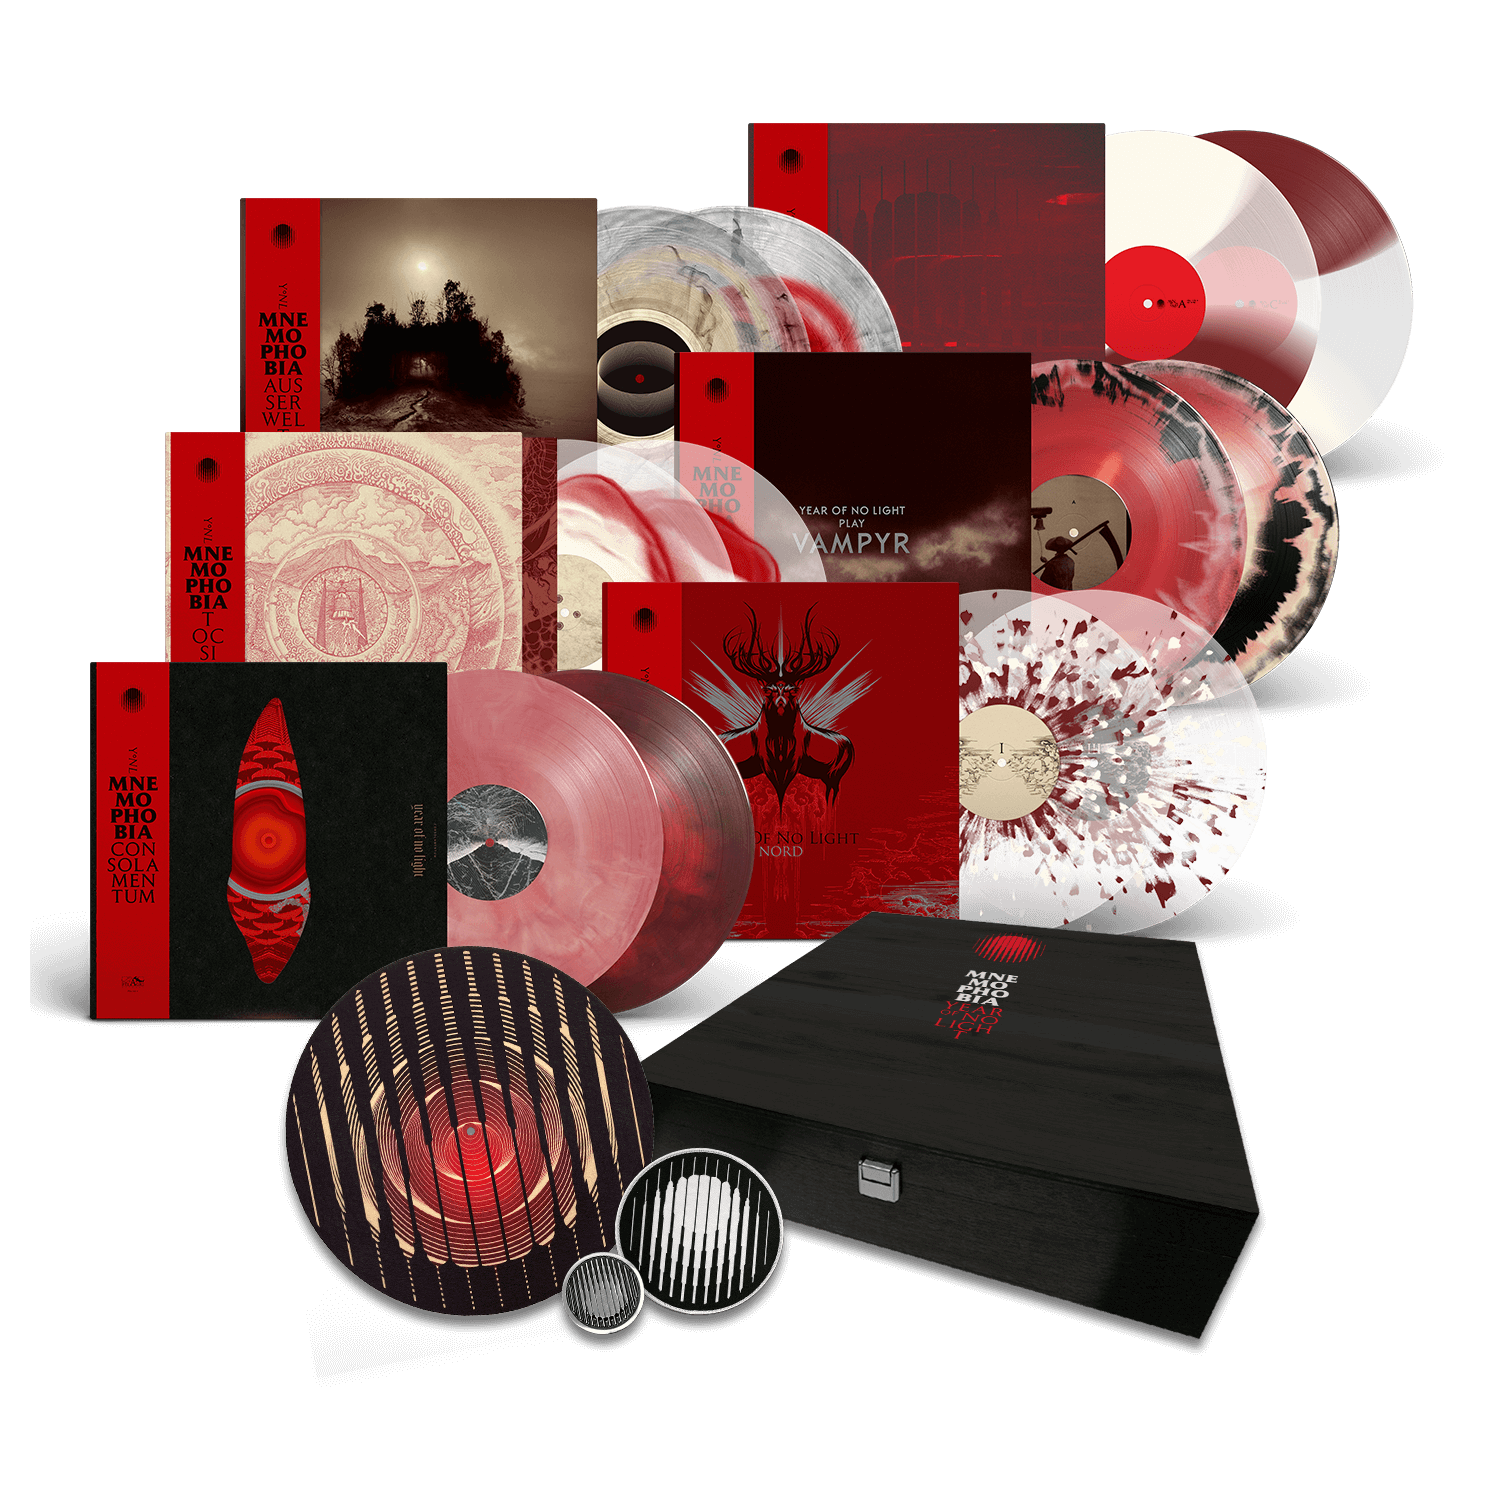 YEAR OF NO LIGHT // MNEMOPHOBIA - LTD. EDITION DELUXE WOODEN BOXSET (12LP)